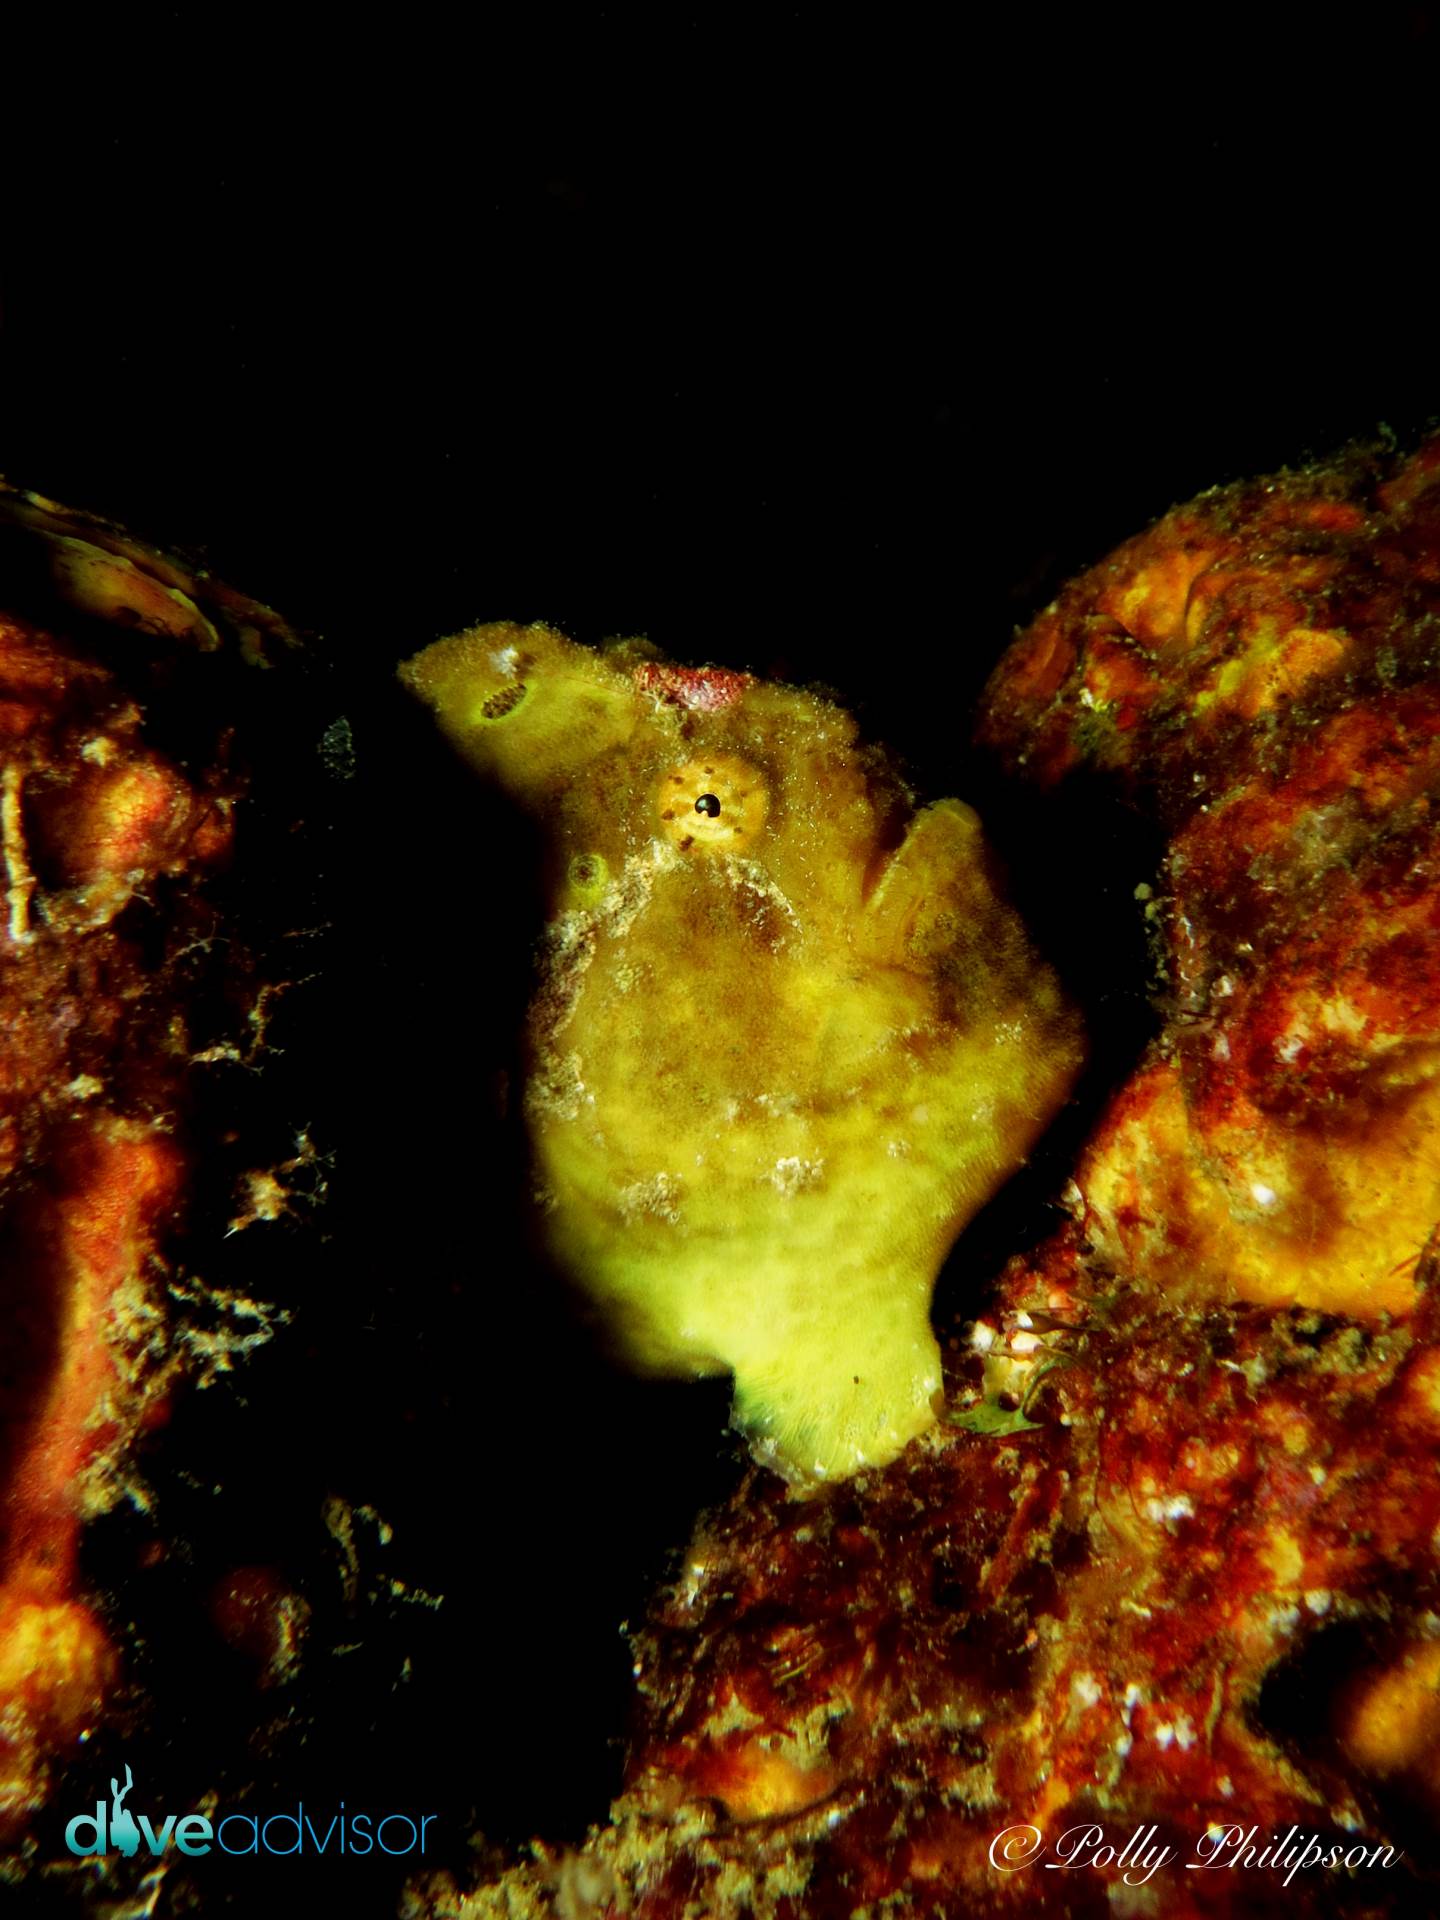 Longlure frogfish use the yellow sponges growing on wrecks as camouflage. This tiny frogfish was hard to spot on the massive shipwreck of the Bianca C.